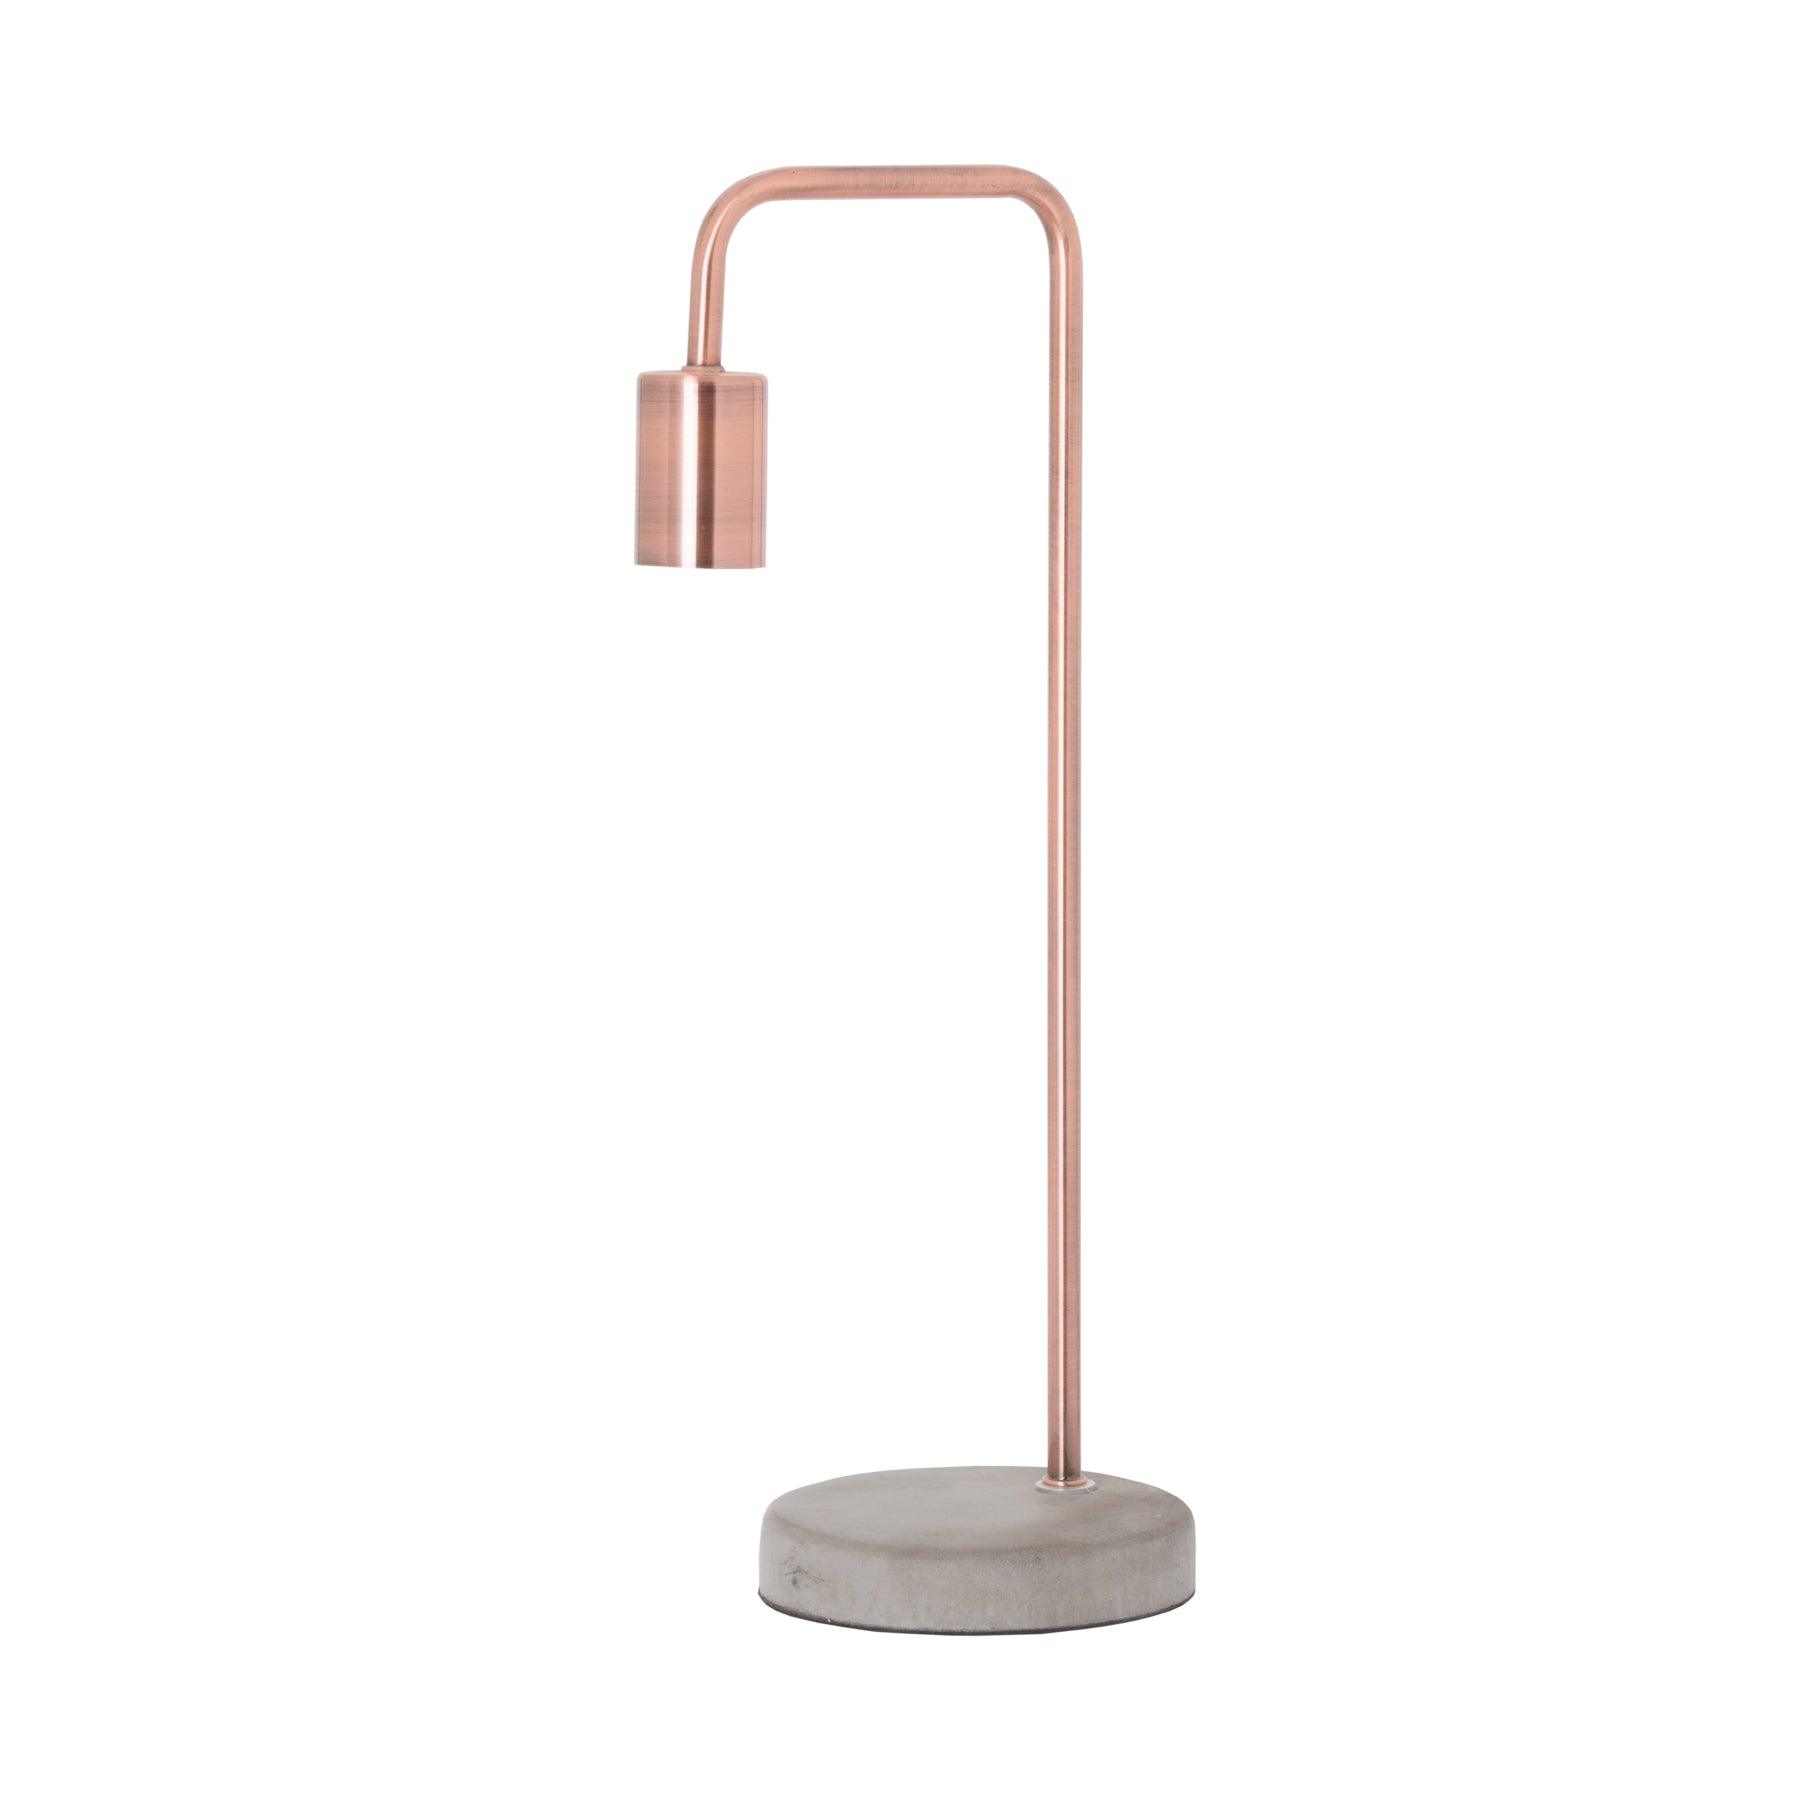 View Copper Industrial Lamp With Stone Base information